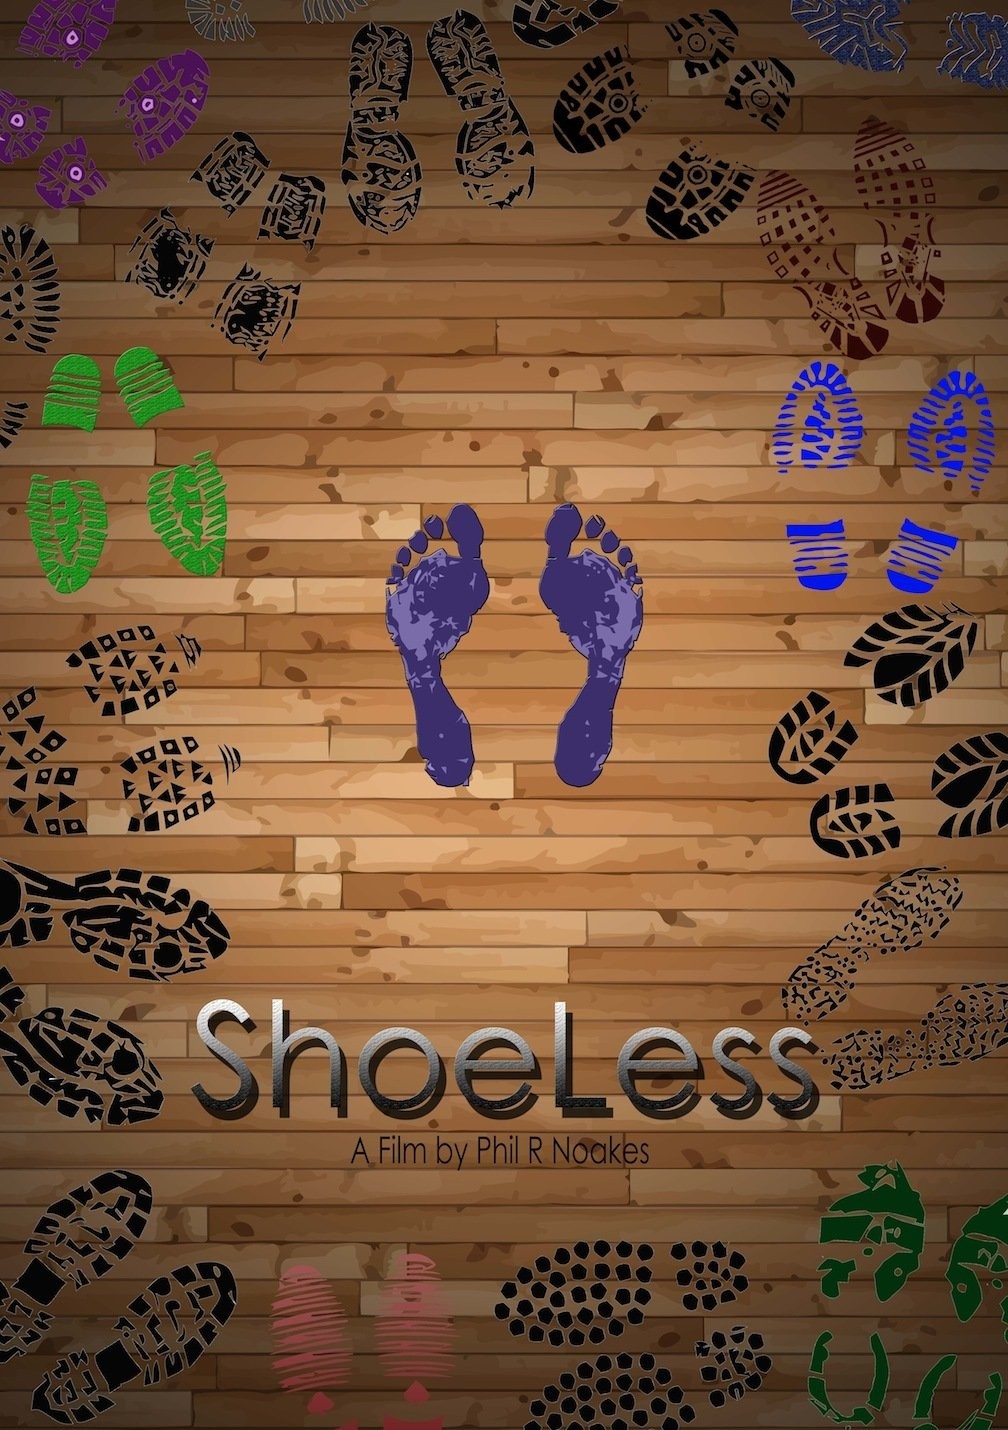 Extra Large Movie Poster Image for Shoeless